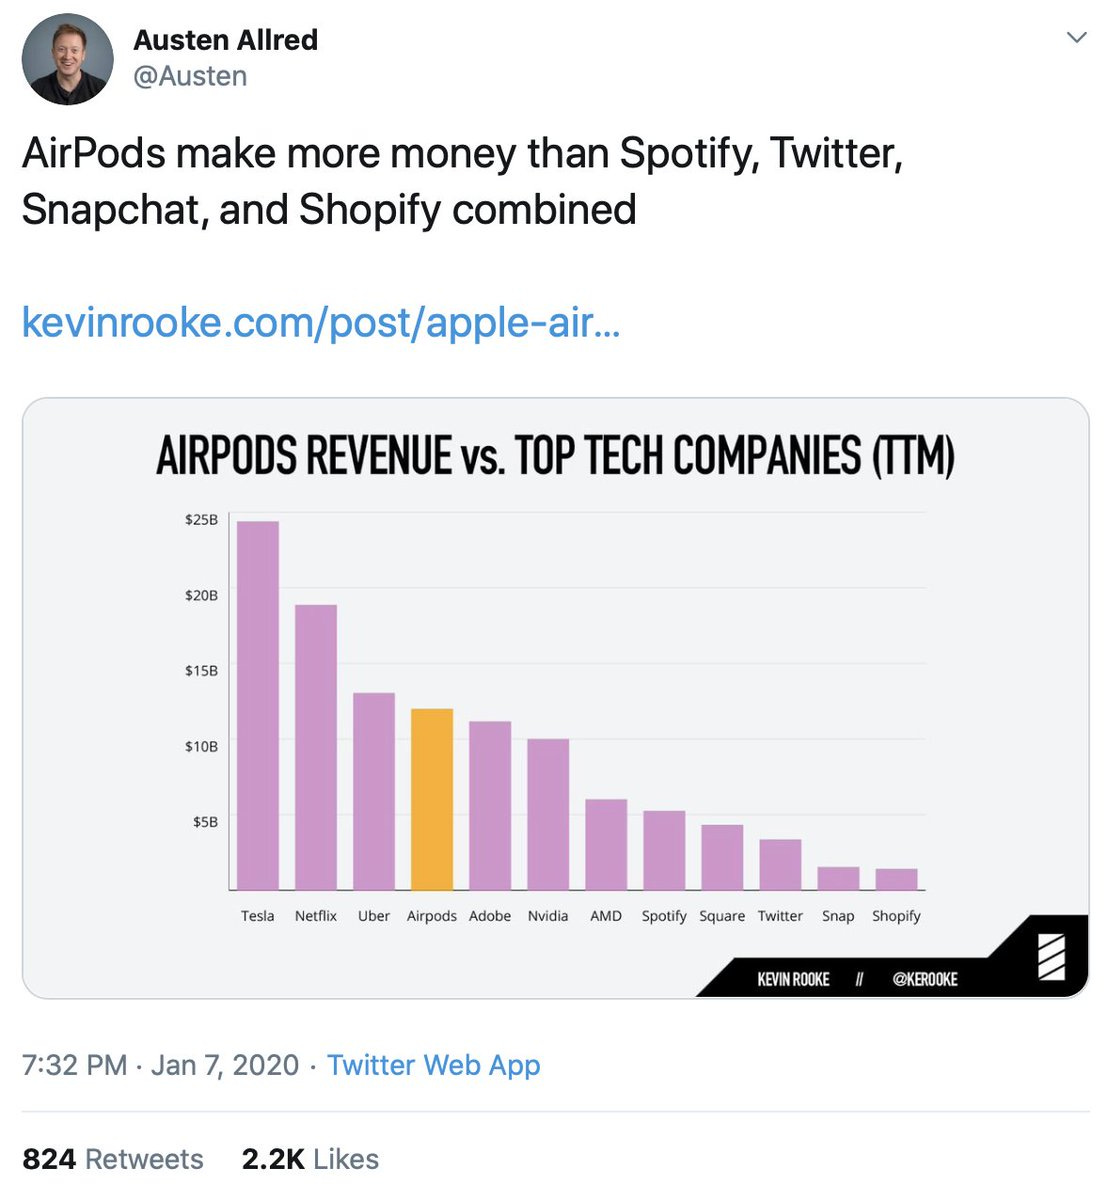 Neil Cybart on Twitter: "1/ A few hours ago, this tweet came to my  attention. It's about AirPods revenue and it's not correct. AirPods revenue  does not exceed Spotify, Twitter, Snapchat, and